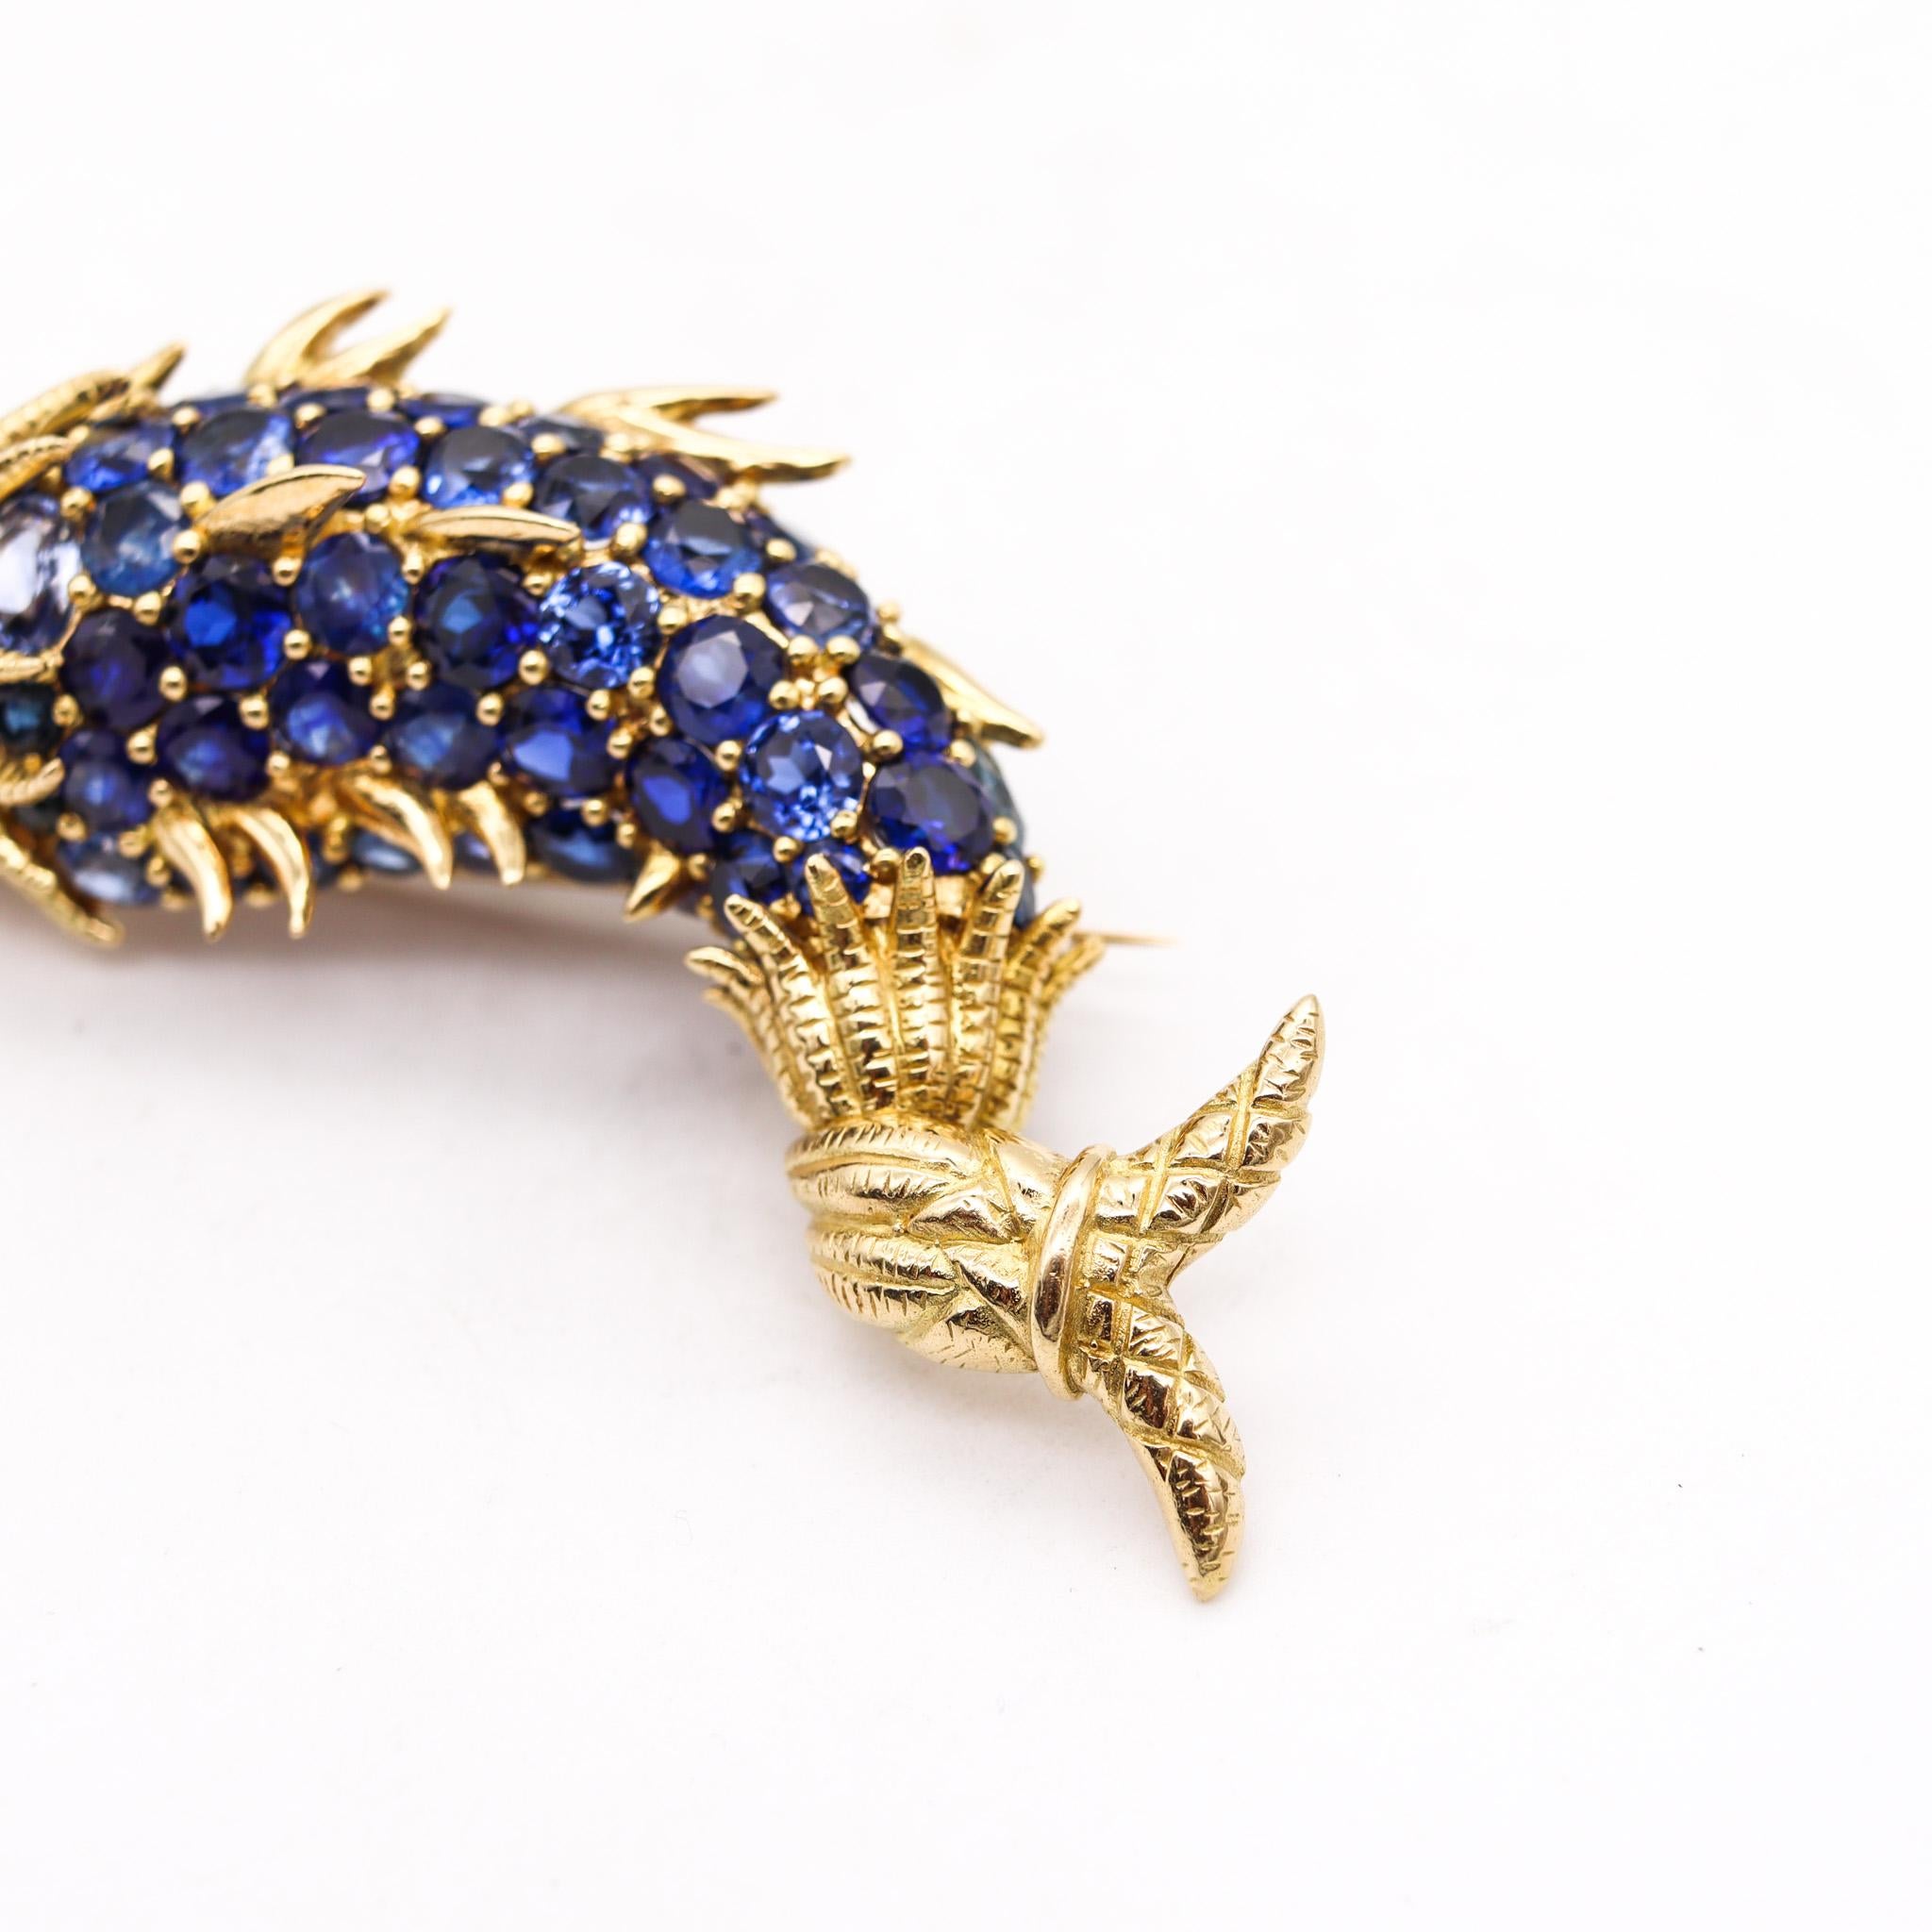 Modernist Tiffany & Co 1968 Mythological Fish Brooch in 18kt Gold with 60.05 Ctw Sapphires For Sale